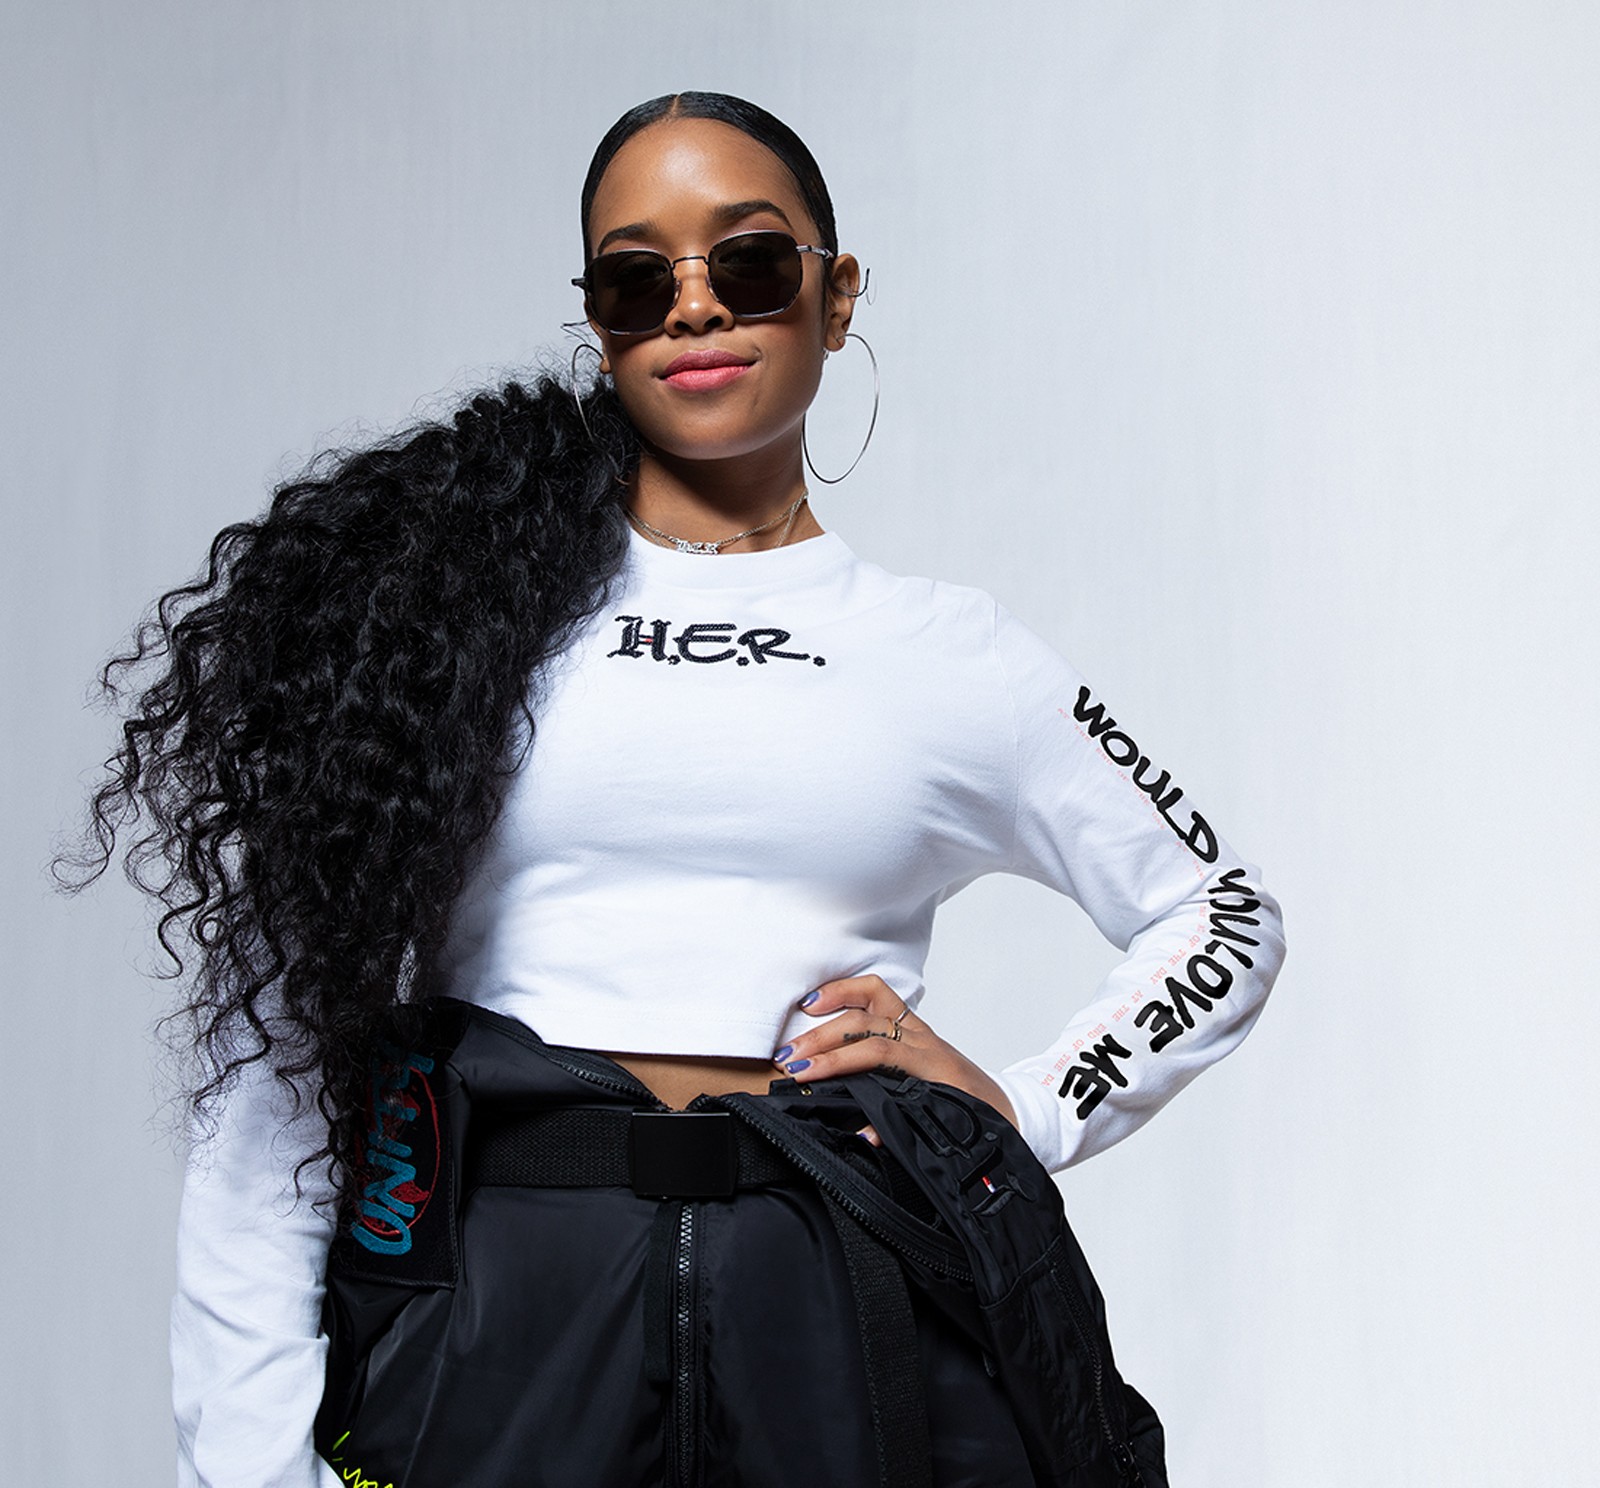 R&B superstar H.E.R about her collection with Hilfigerf Aaliyah”